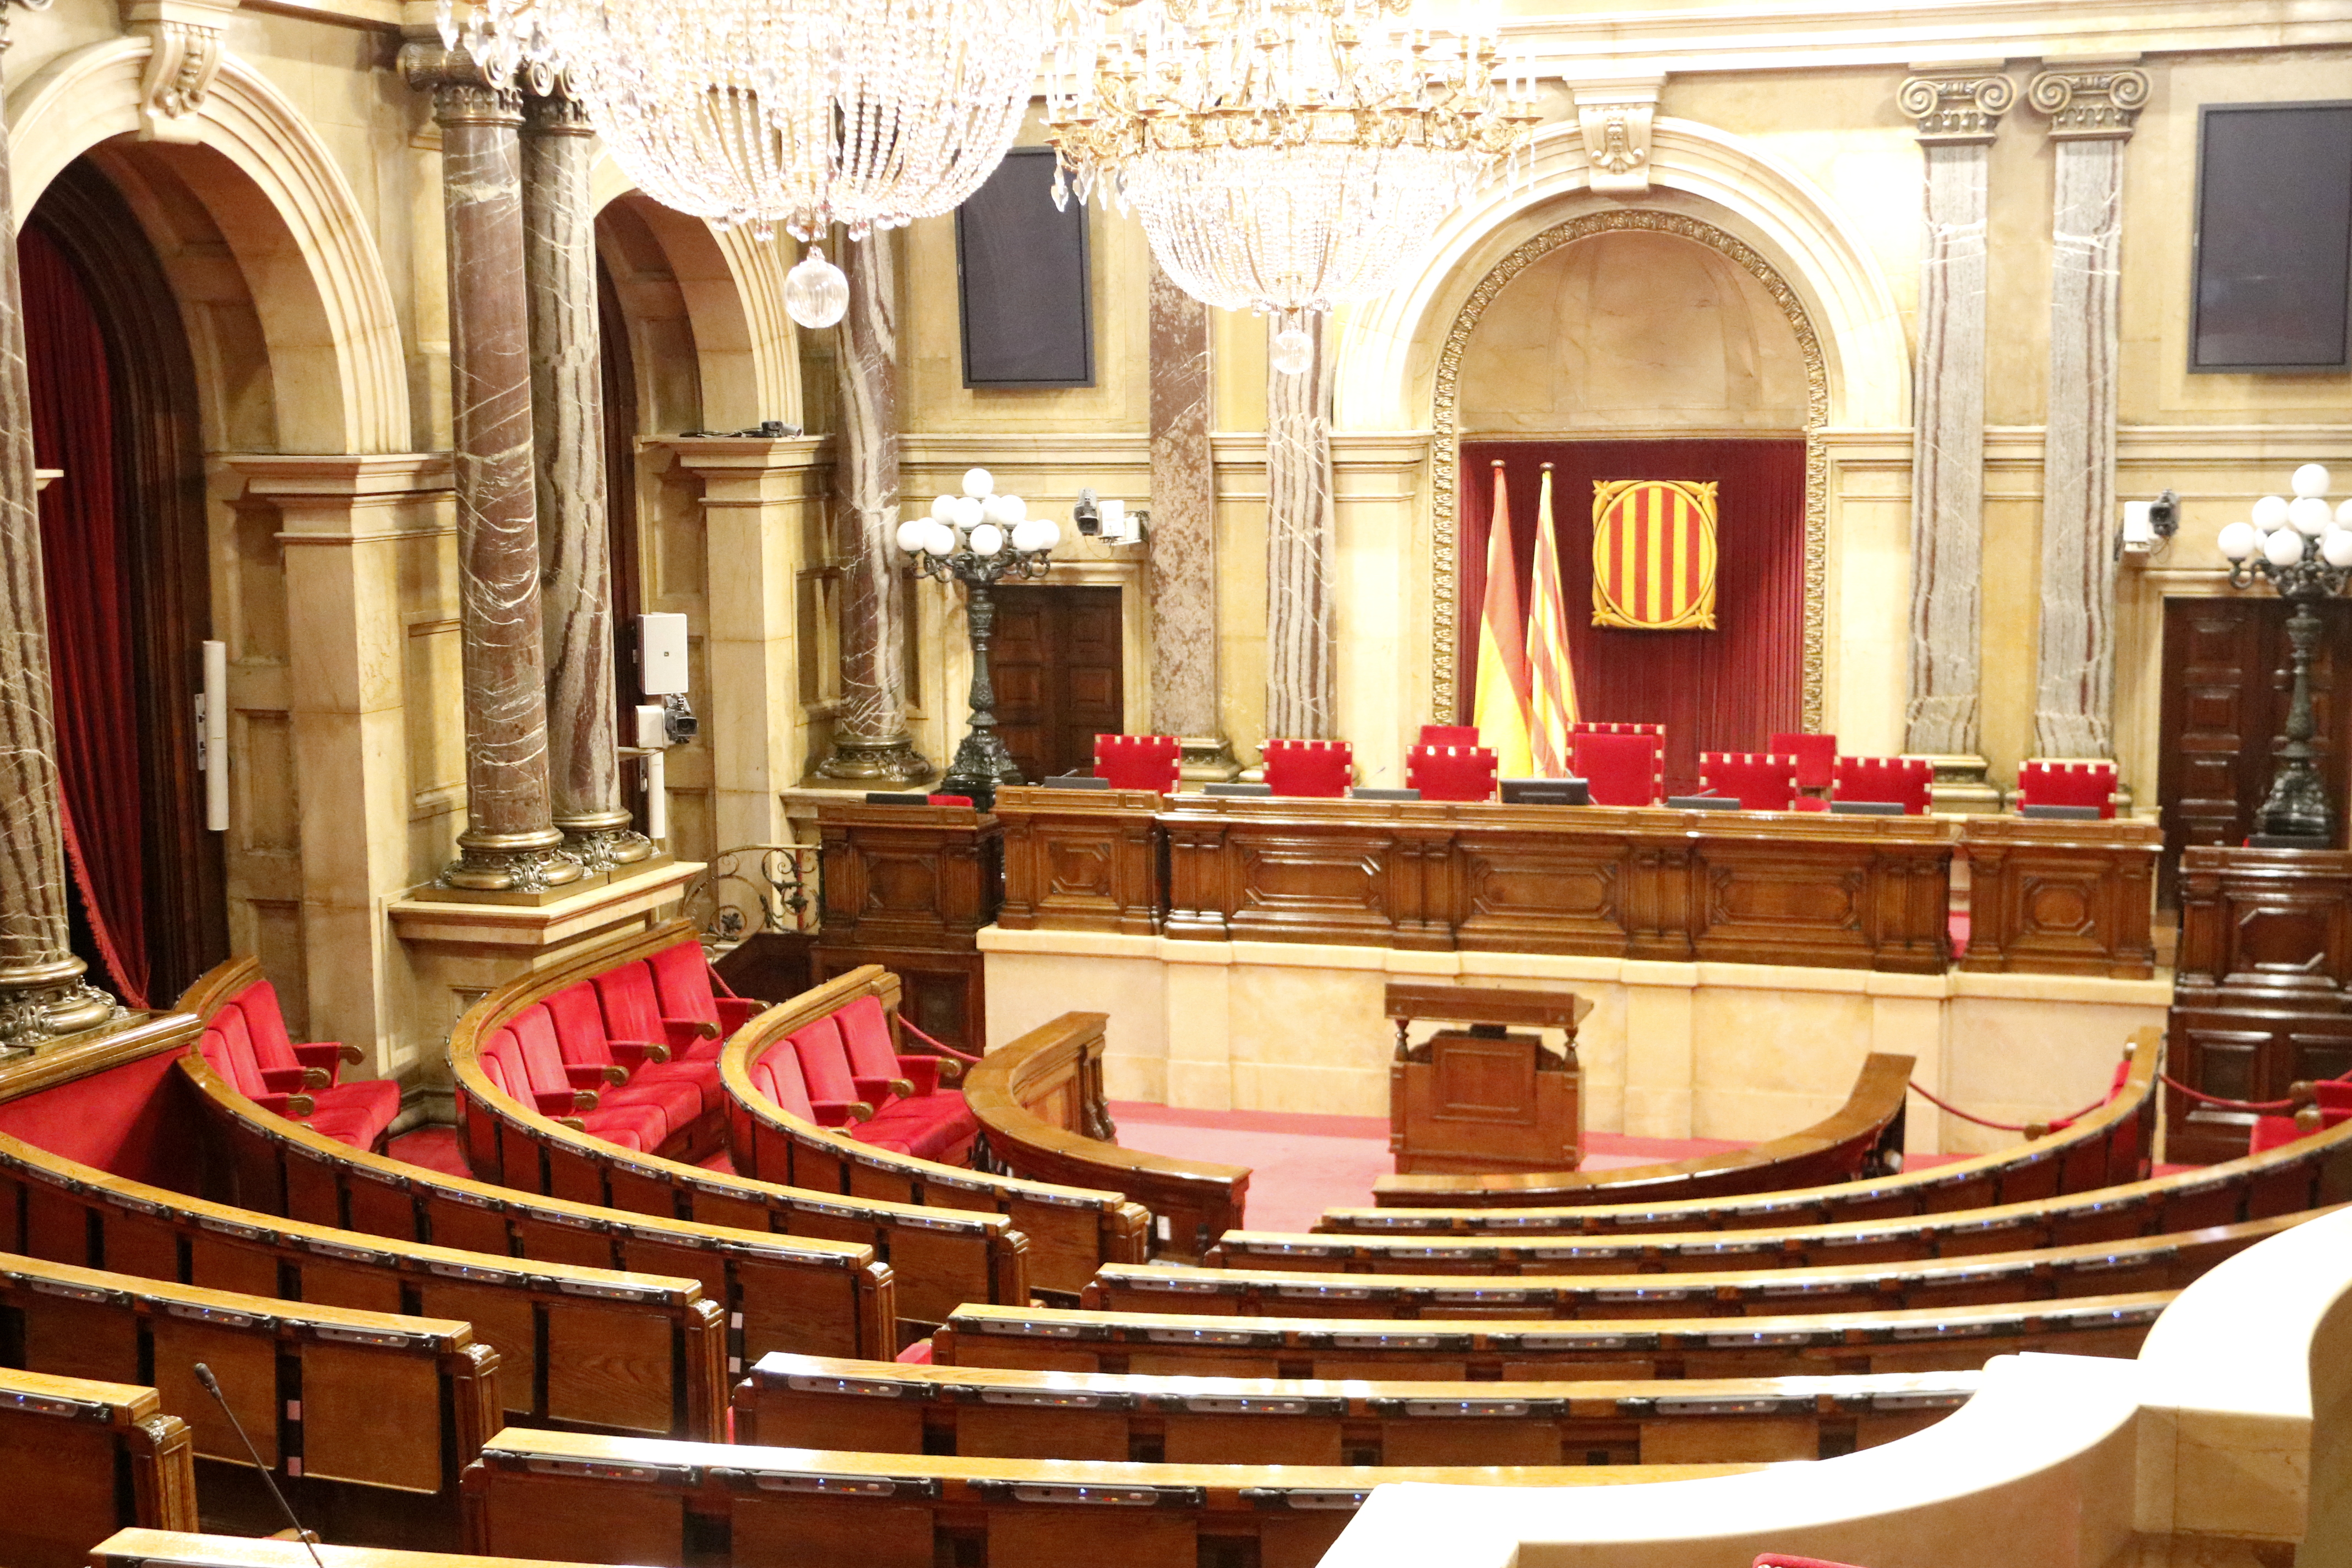 An image of the Catalan Parliament empty on January 2018 (by Rafa Garrido)